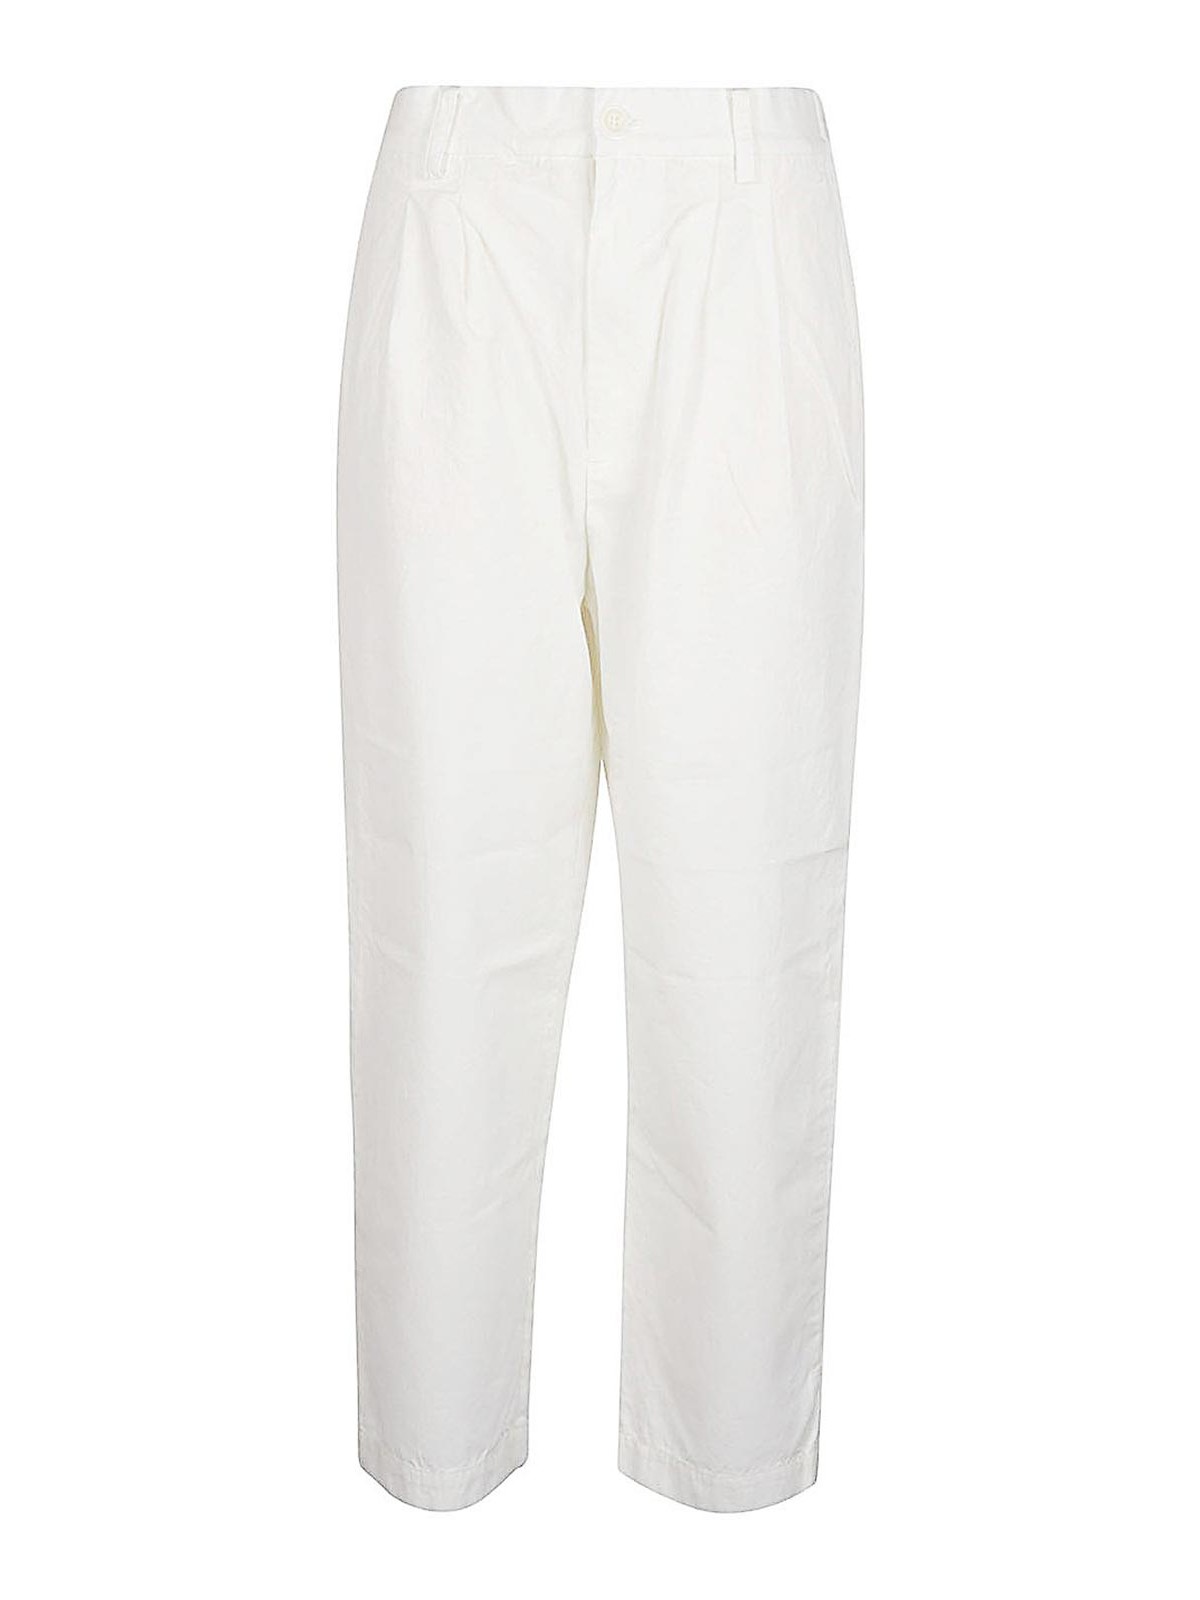 Sarahwear Cotton Trousers In White